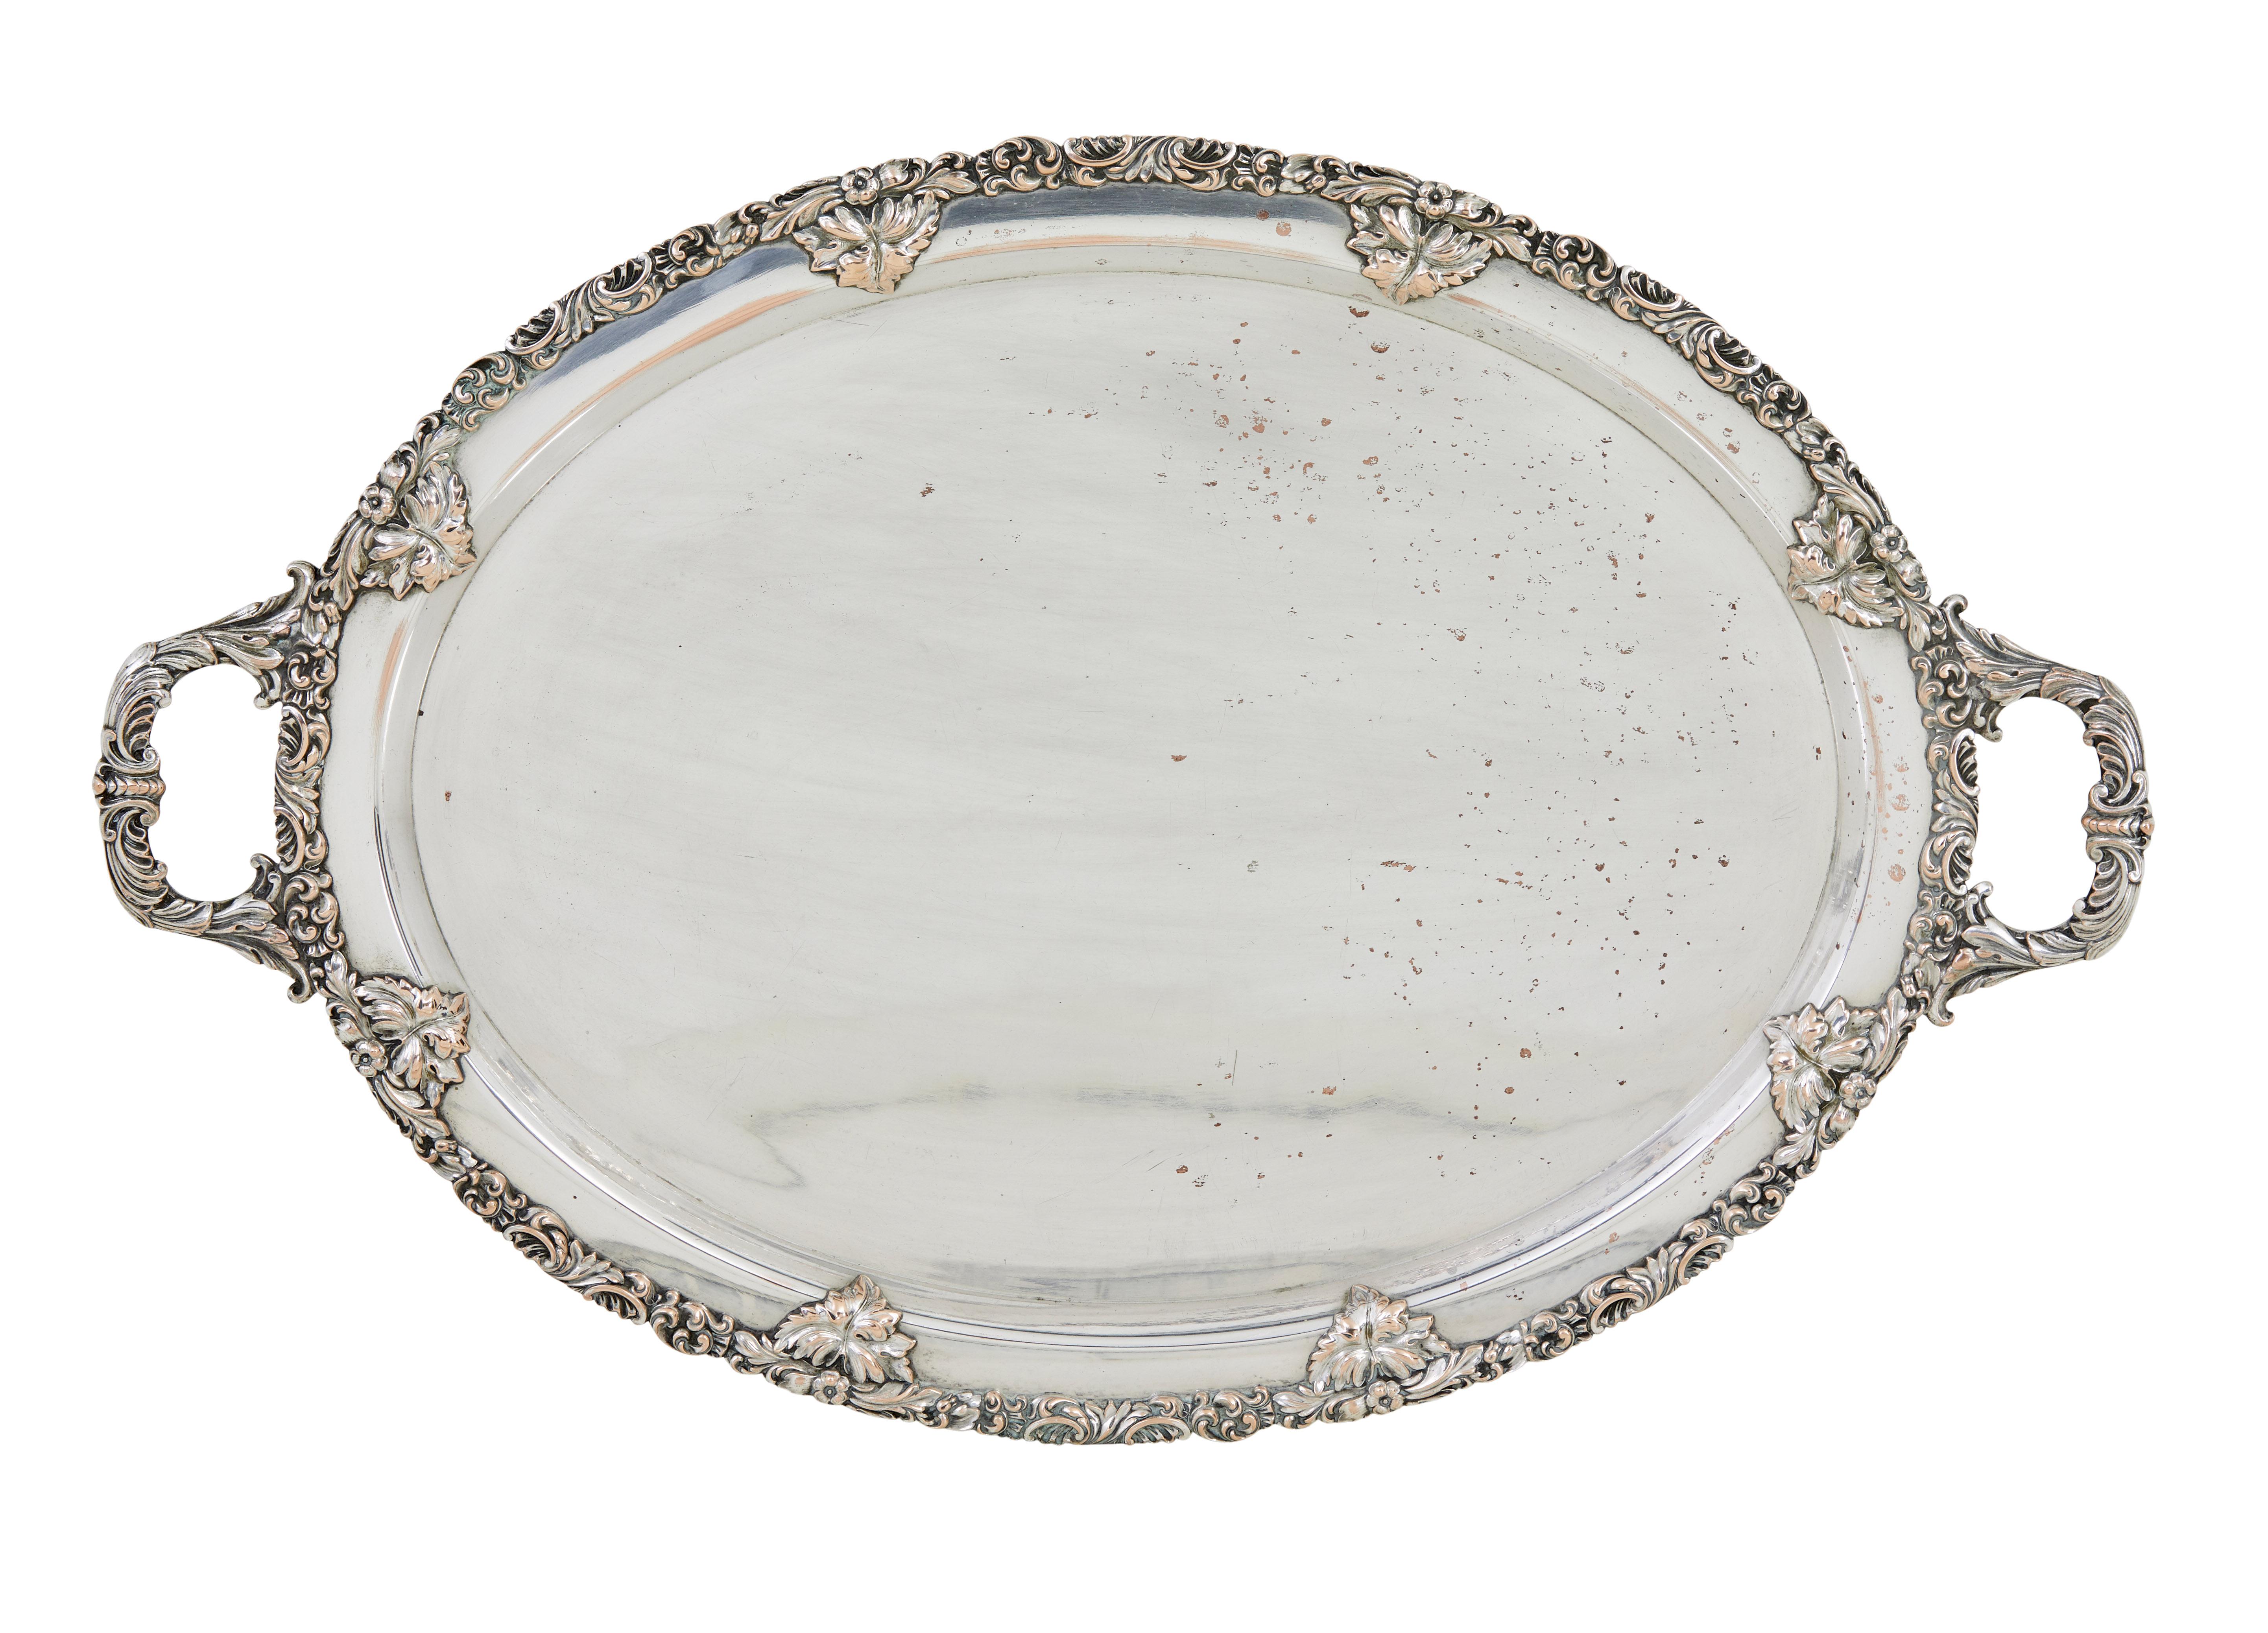 Collection of 3 silver plate ornate trays circa 1950.

3 ornate trays, oval shaped, scalloped edged and all with carrying handles. Smallest is stamped g.A.B sweden on the reverse

1 tray with plate loss and rubbing.